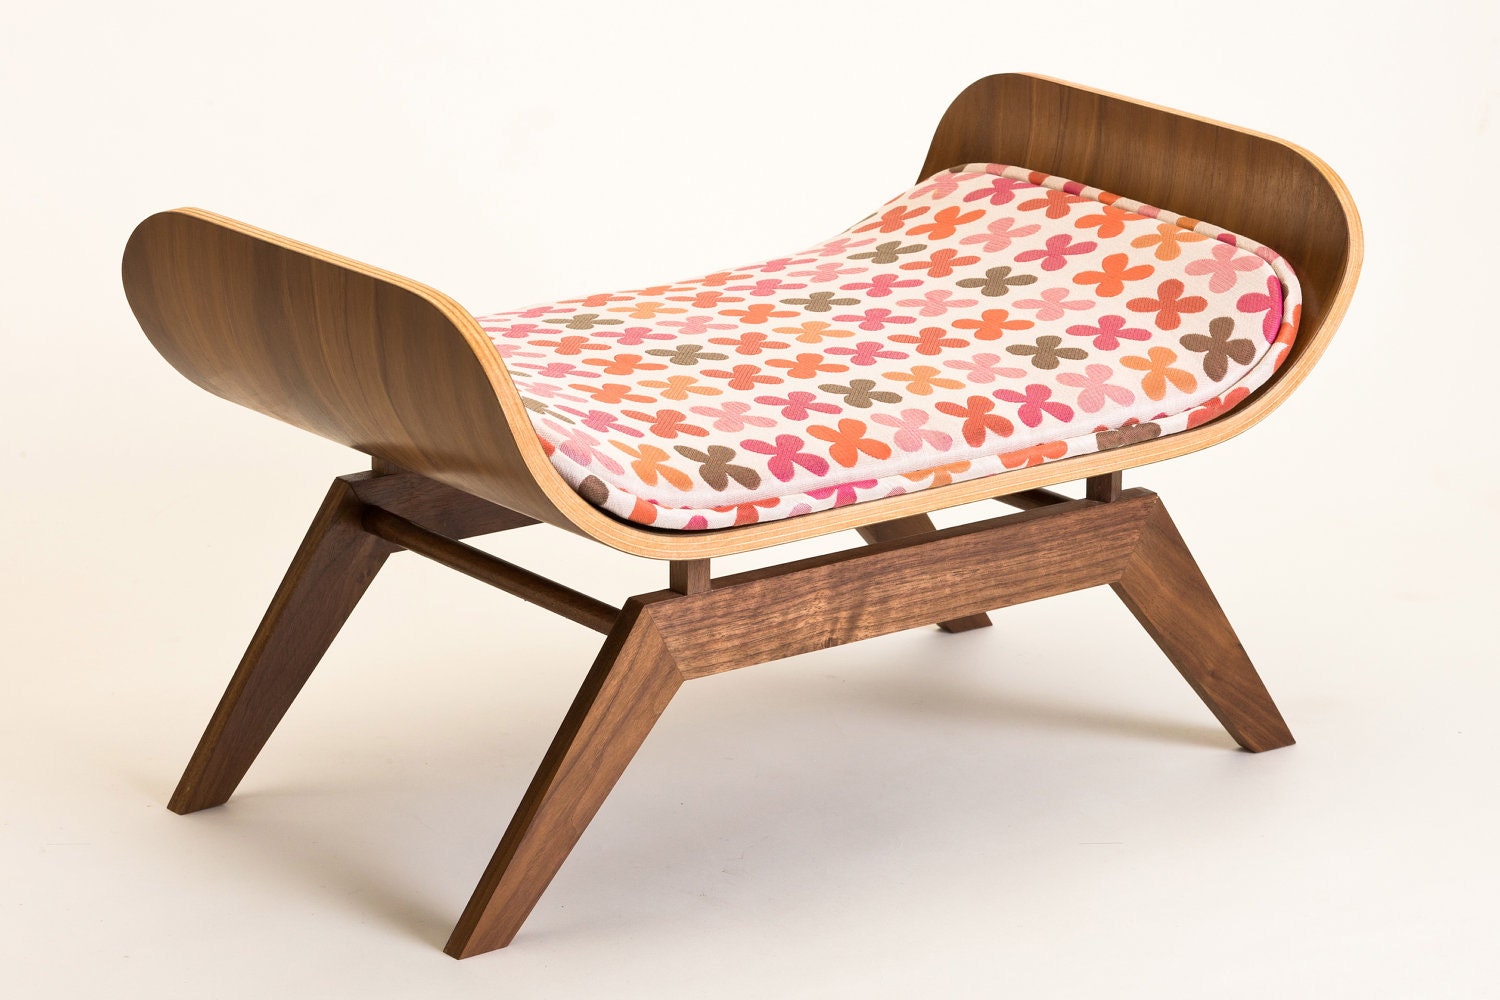 HUGE SALE The Canopy Lounge in Quatrefoil by Alexander Girard